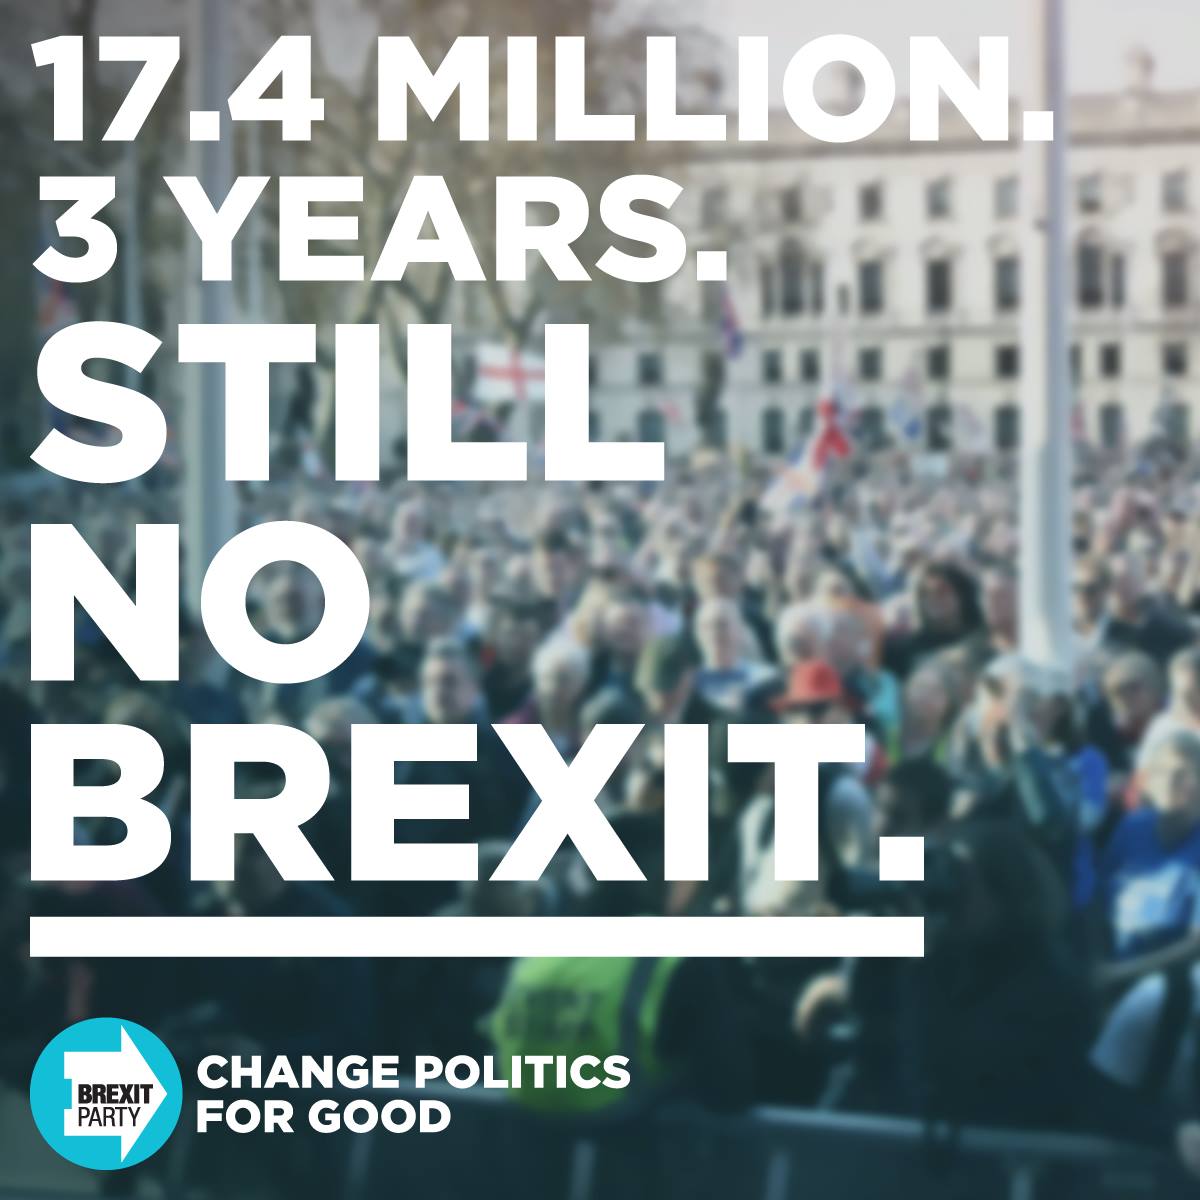 Since 2016, the Brexit right has fetishised the 17.4m who voted to leave as if the 16.1m who voted to remain didn't exist. Exhibit A from the Brexit Party: 2/